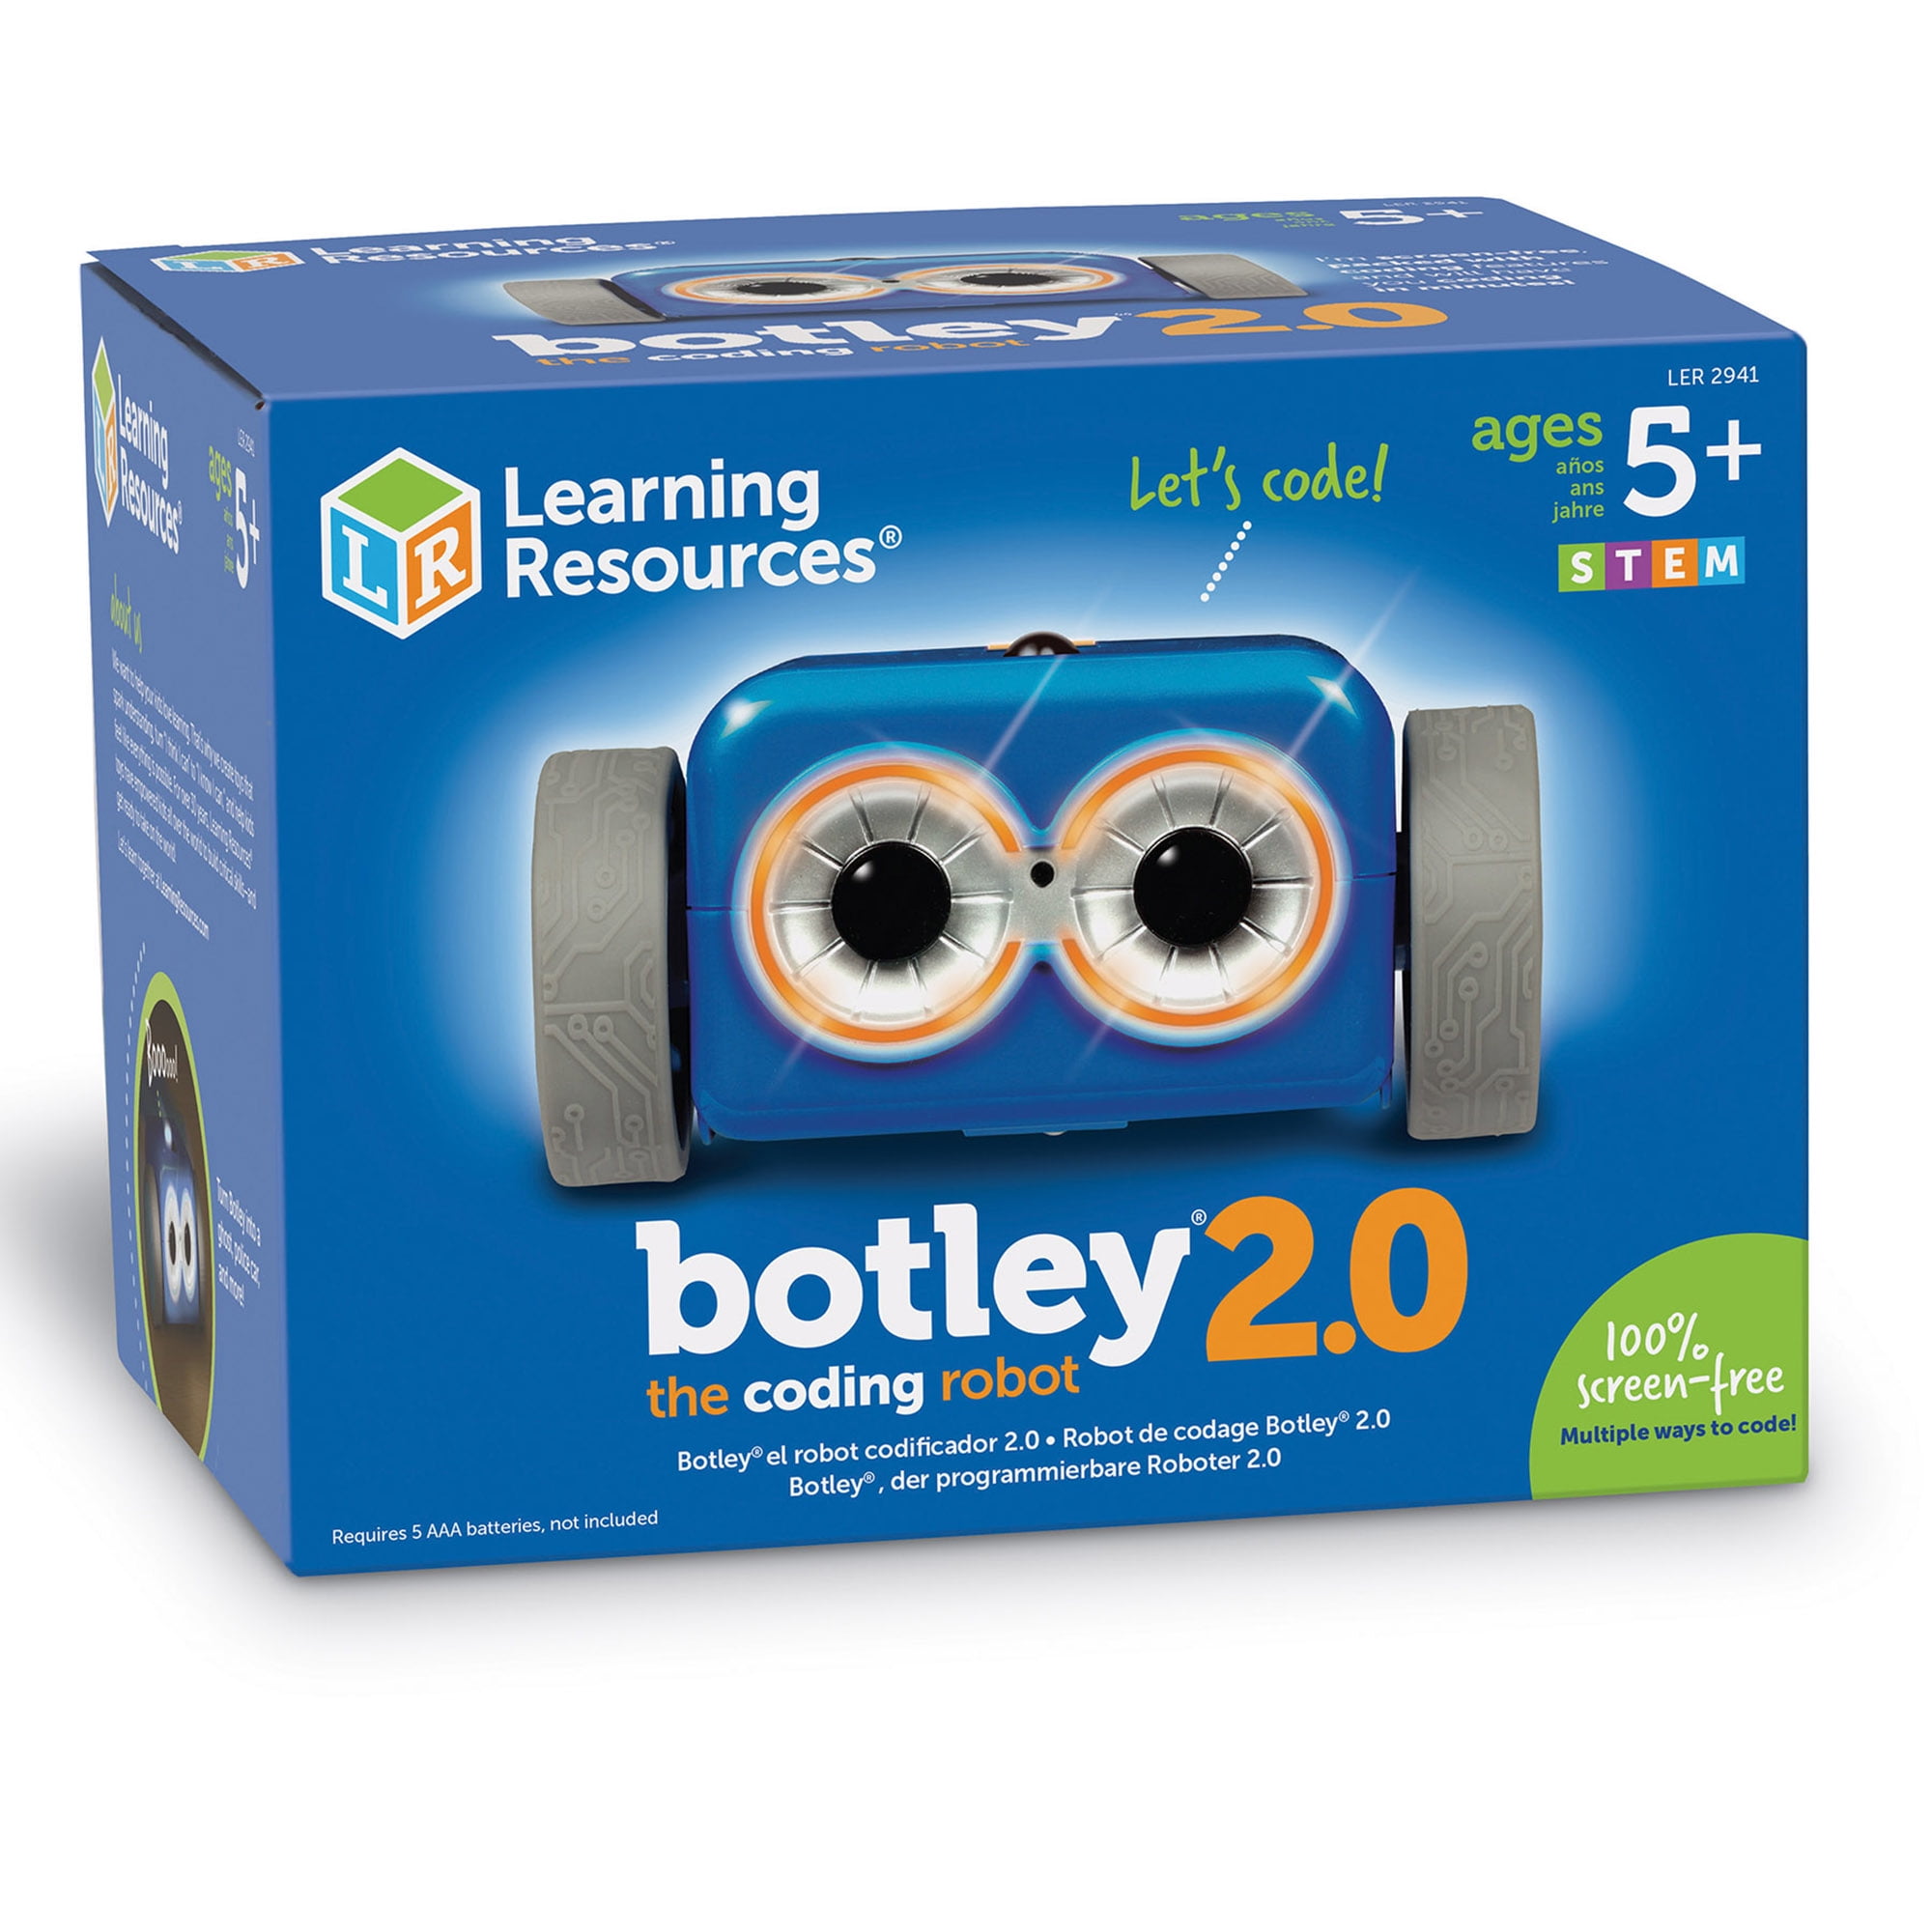 Learning Resources Botley the Coding Robot Classroom Set, 239 Pieces